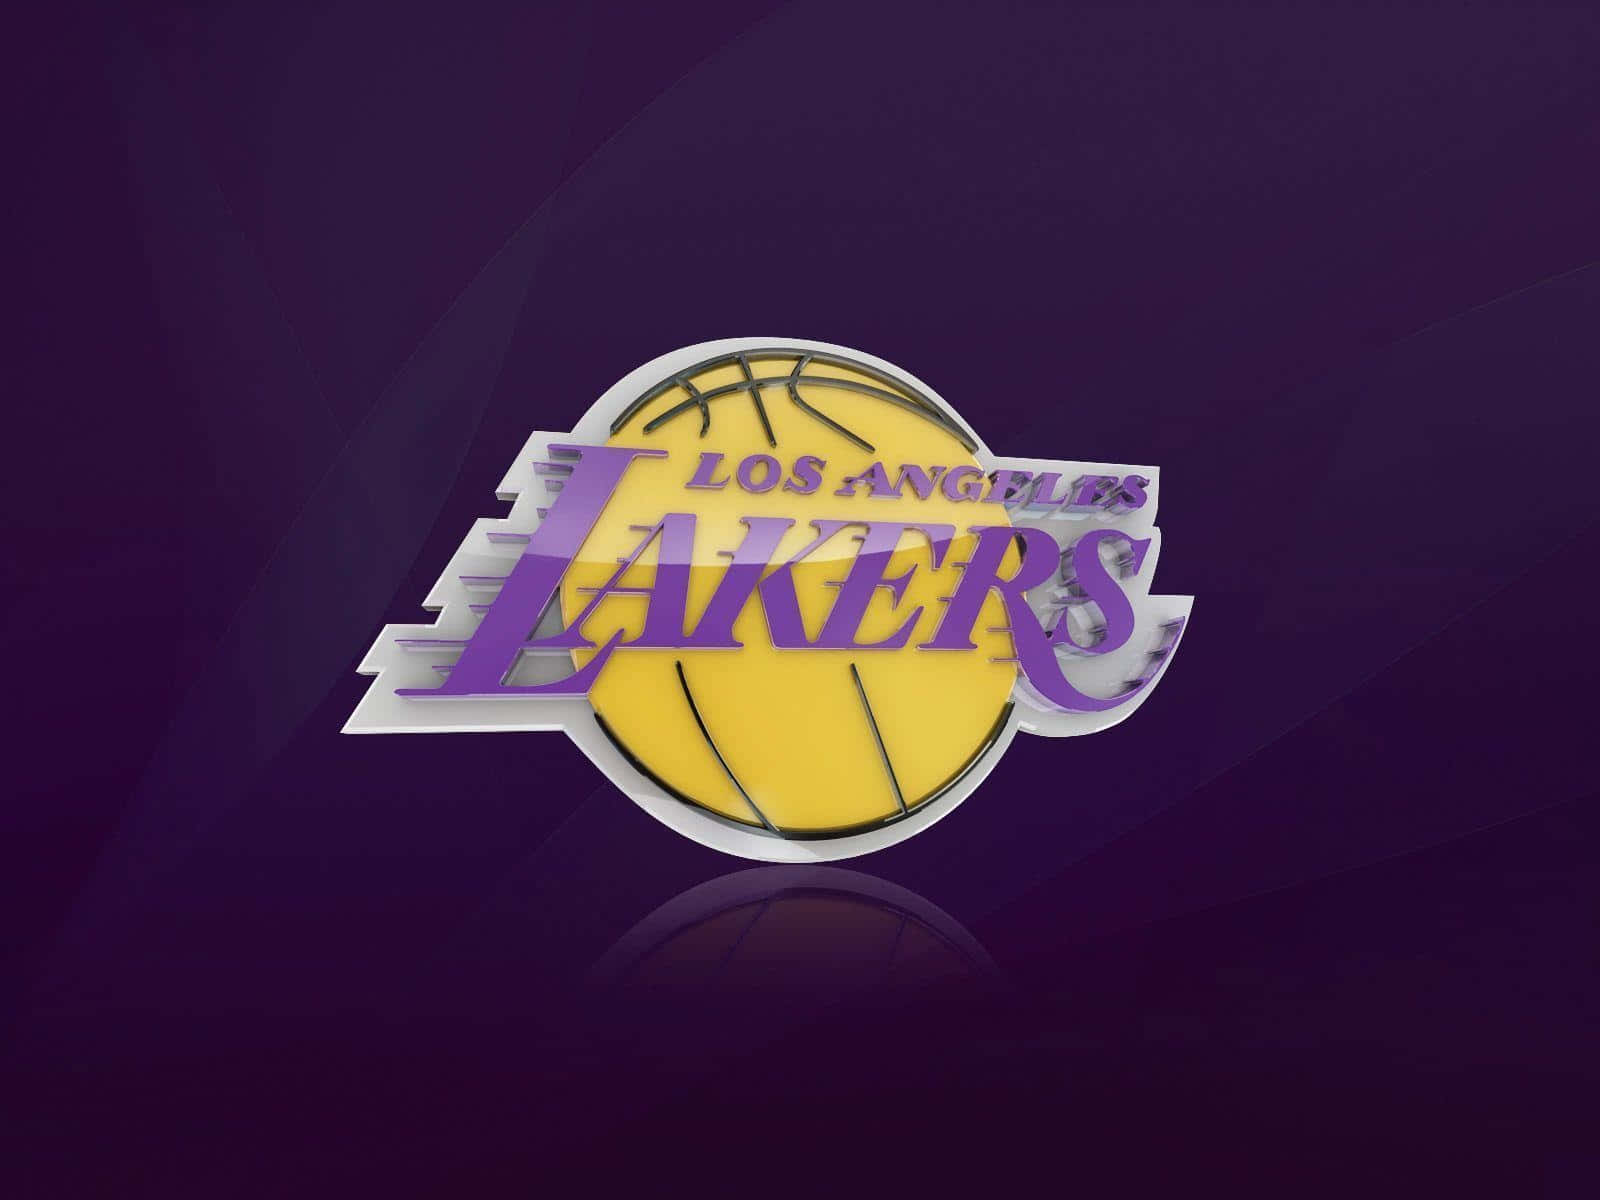 Lakers background Stock Photos, Royalty Free Lakers background